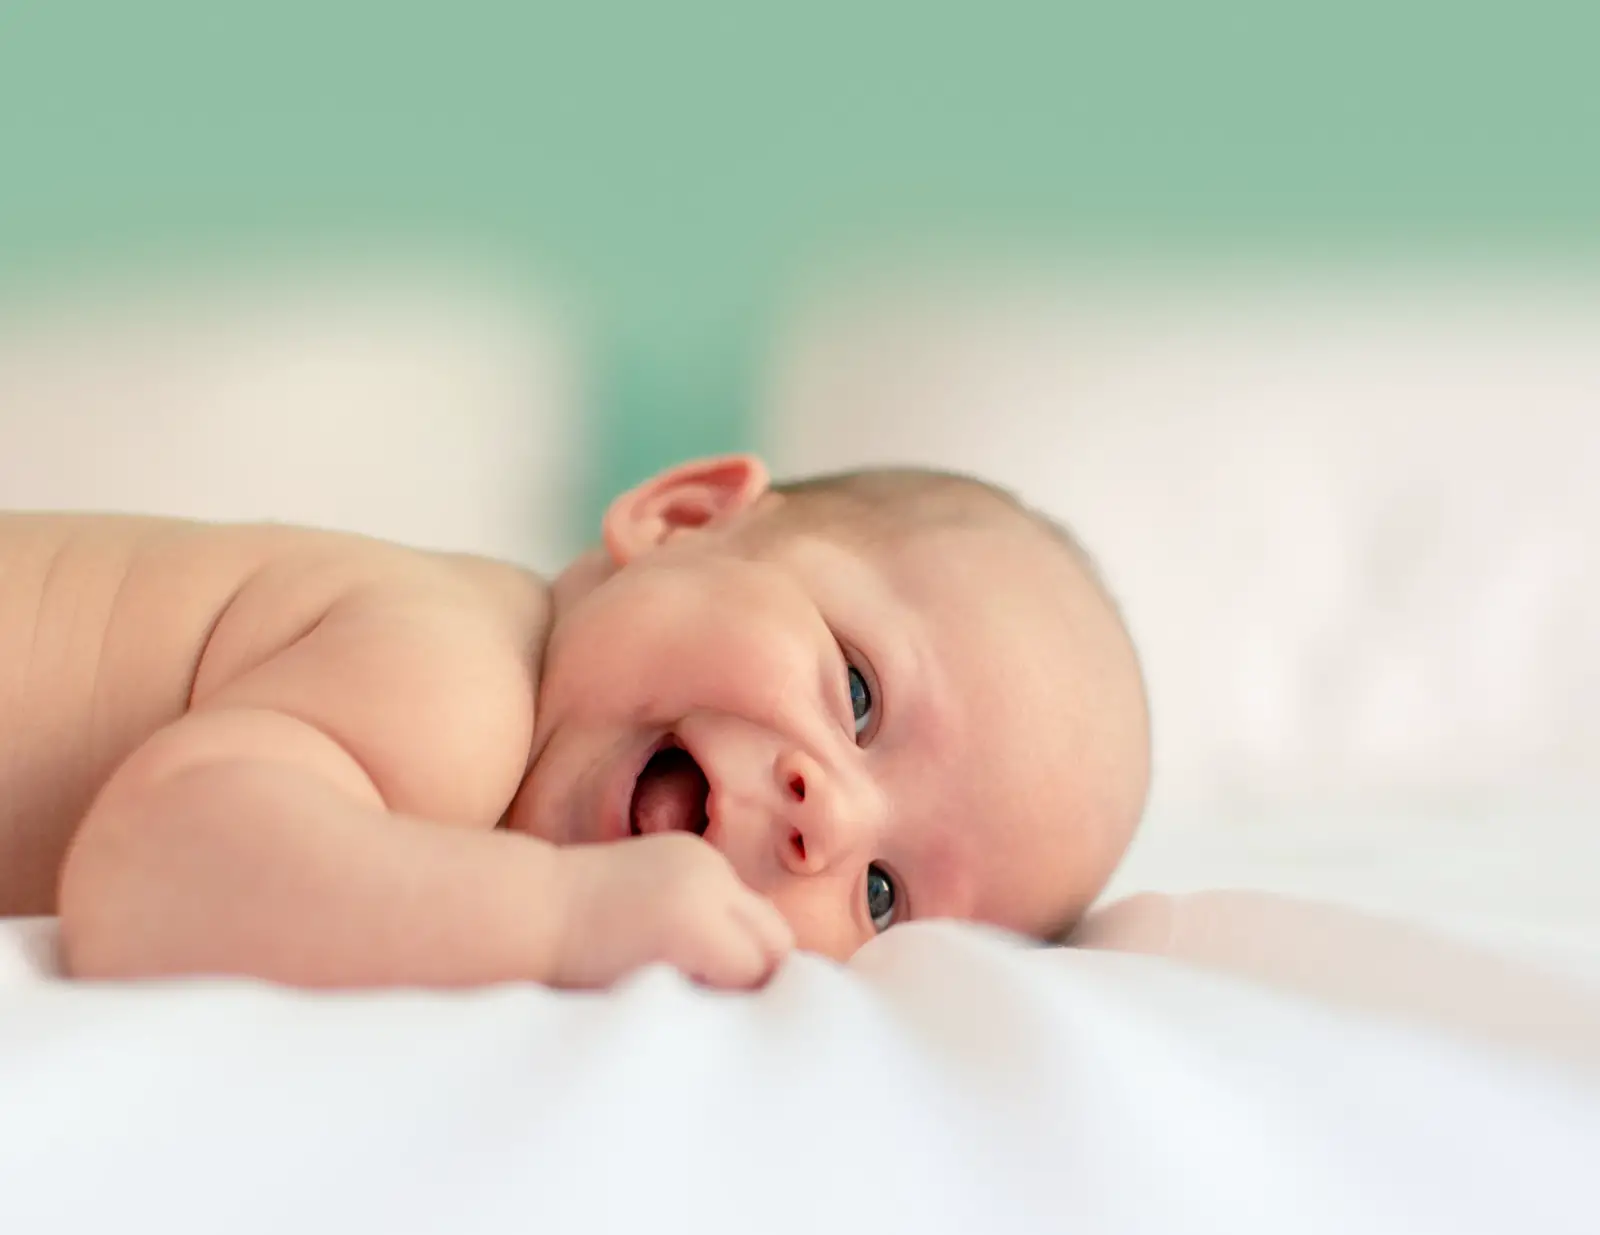 Smiling baby lying on a white towel